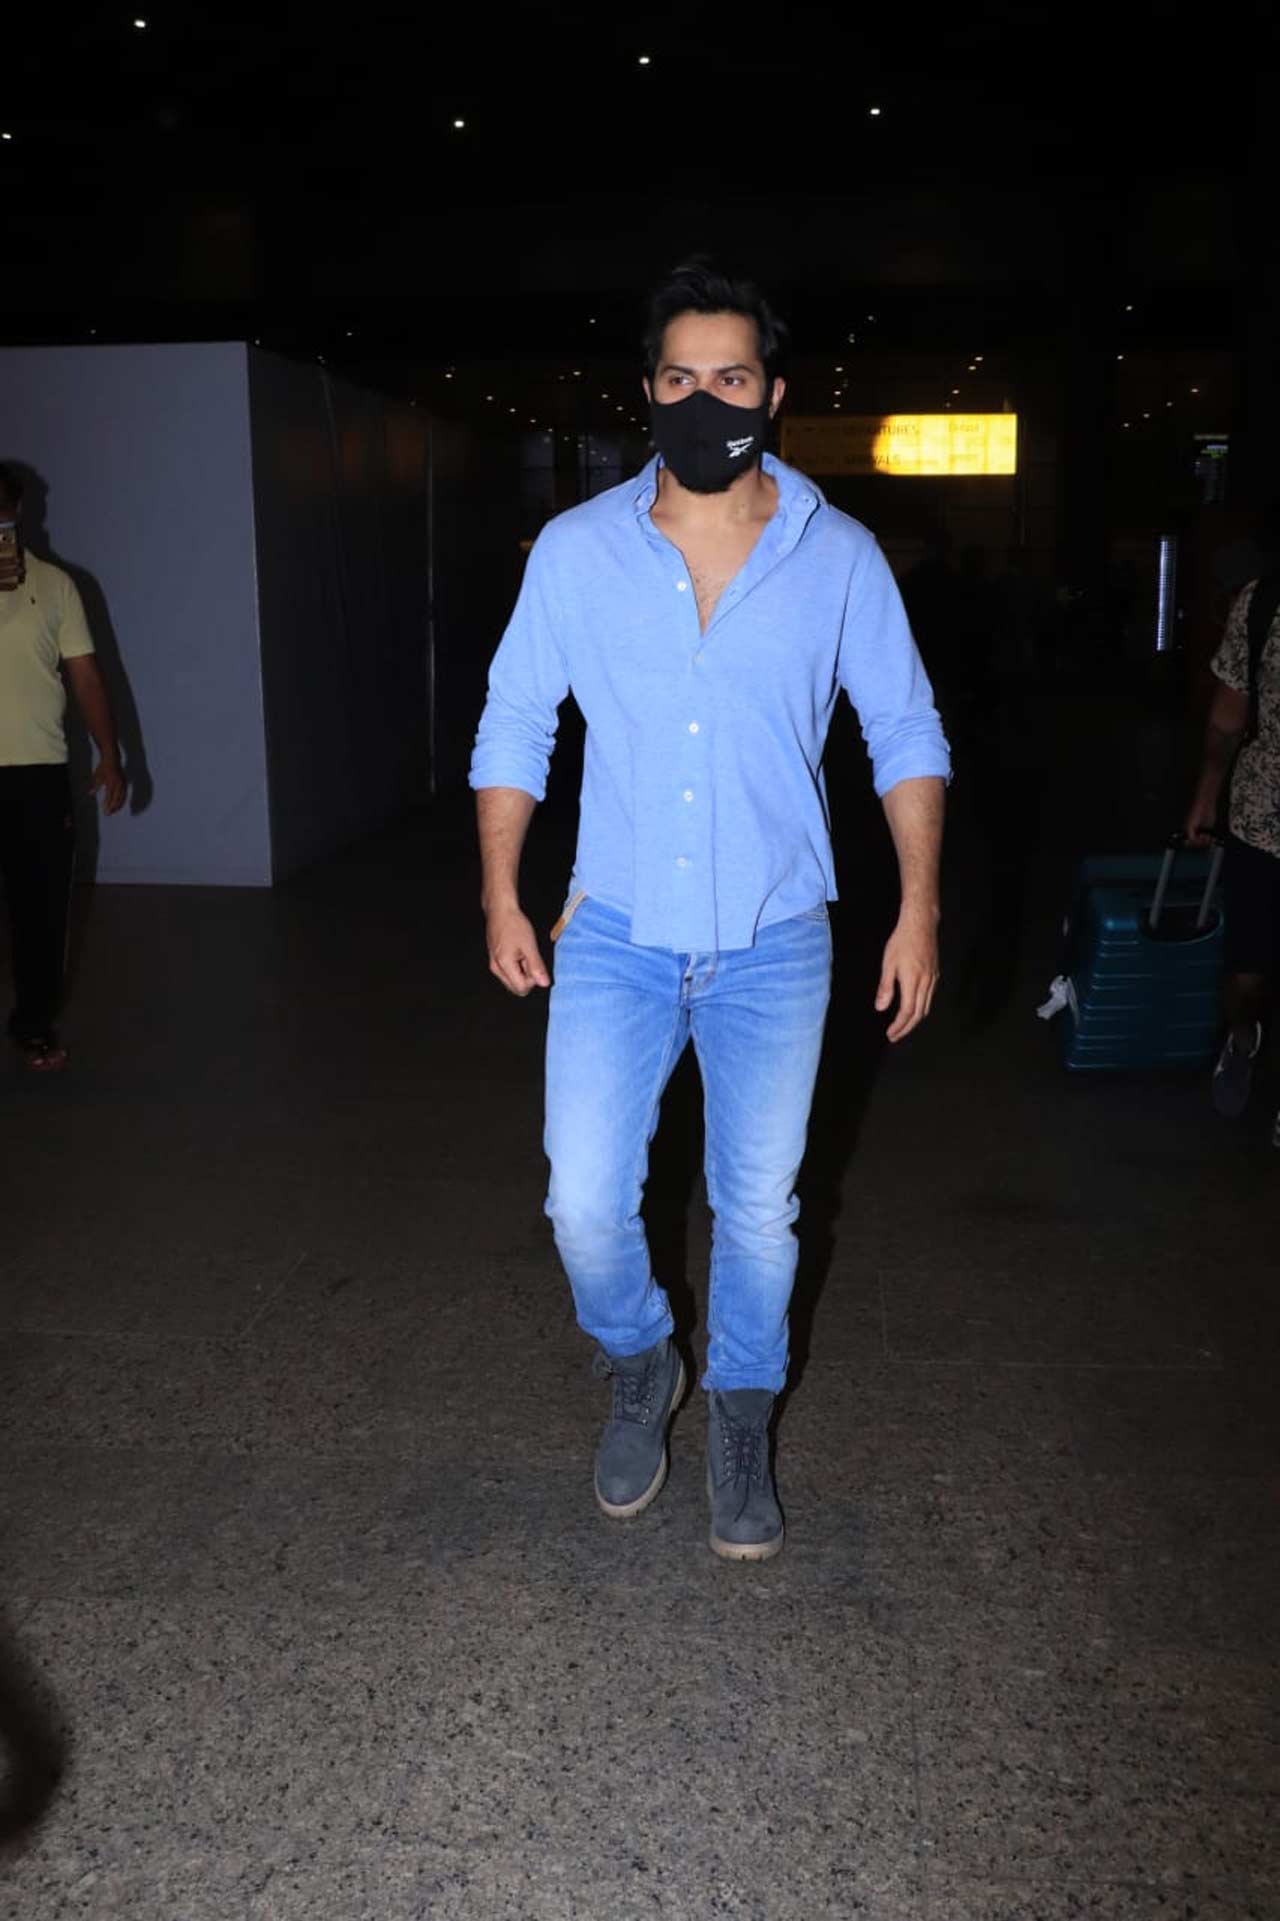 Coolie No 1 actor Varun Dhawan was also snapped by the shutterbugs at the Mumbai airport. The actor, on the work front, will be next seen in  Bhediya, Rannbhoomi and Jug Jugg Jeeyo.